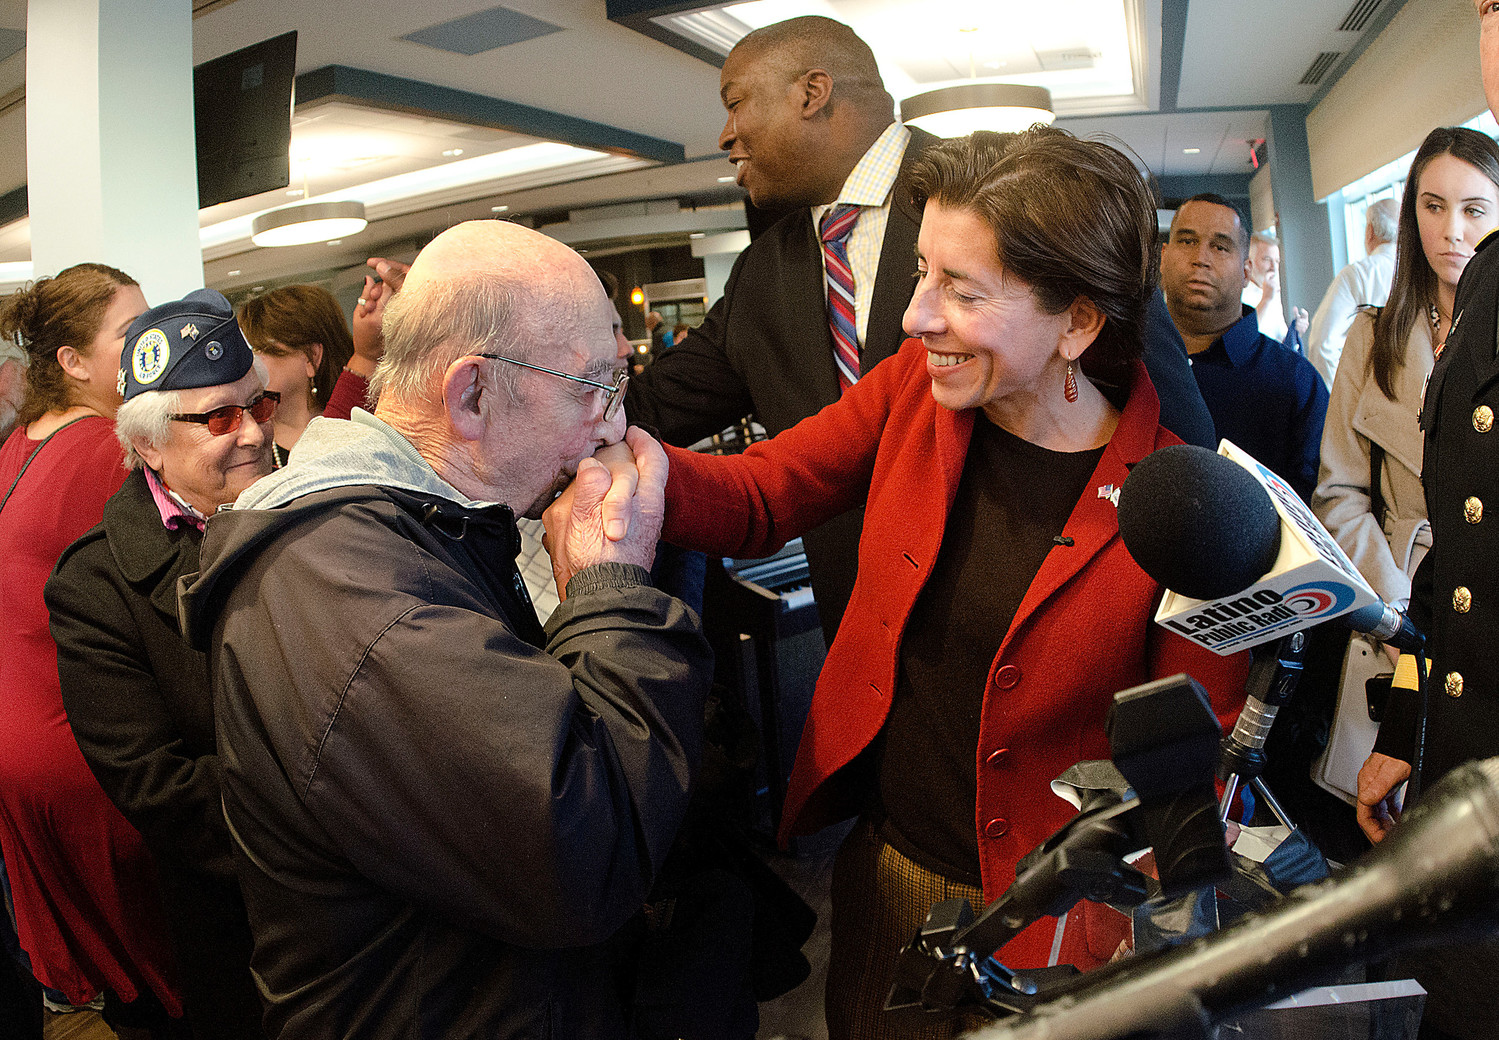 WWII veteran Aime SanSouci kisses the hand of Governor Gina Raimondo as veterans lined up to meet her after the ceremony. The 88th Infantry Division veteran was injured during the war in France and is thankful to be in the new veterans home.